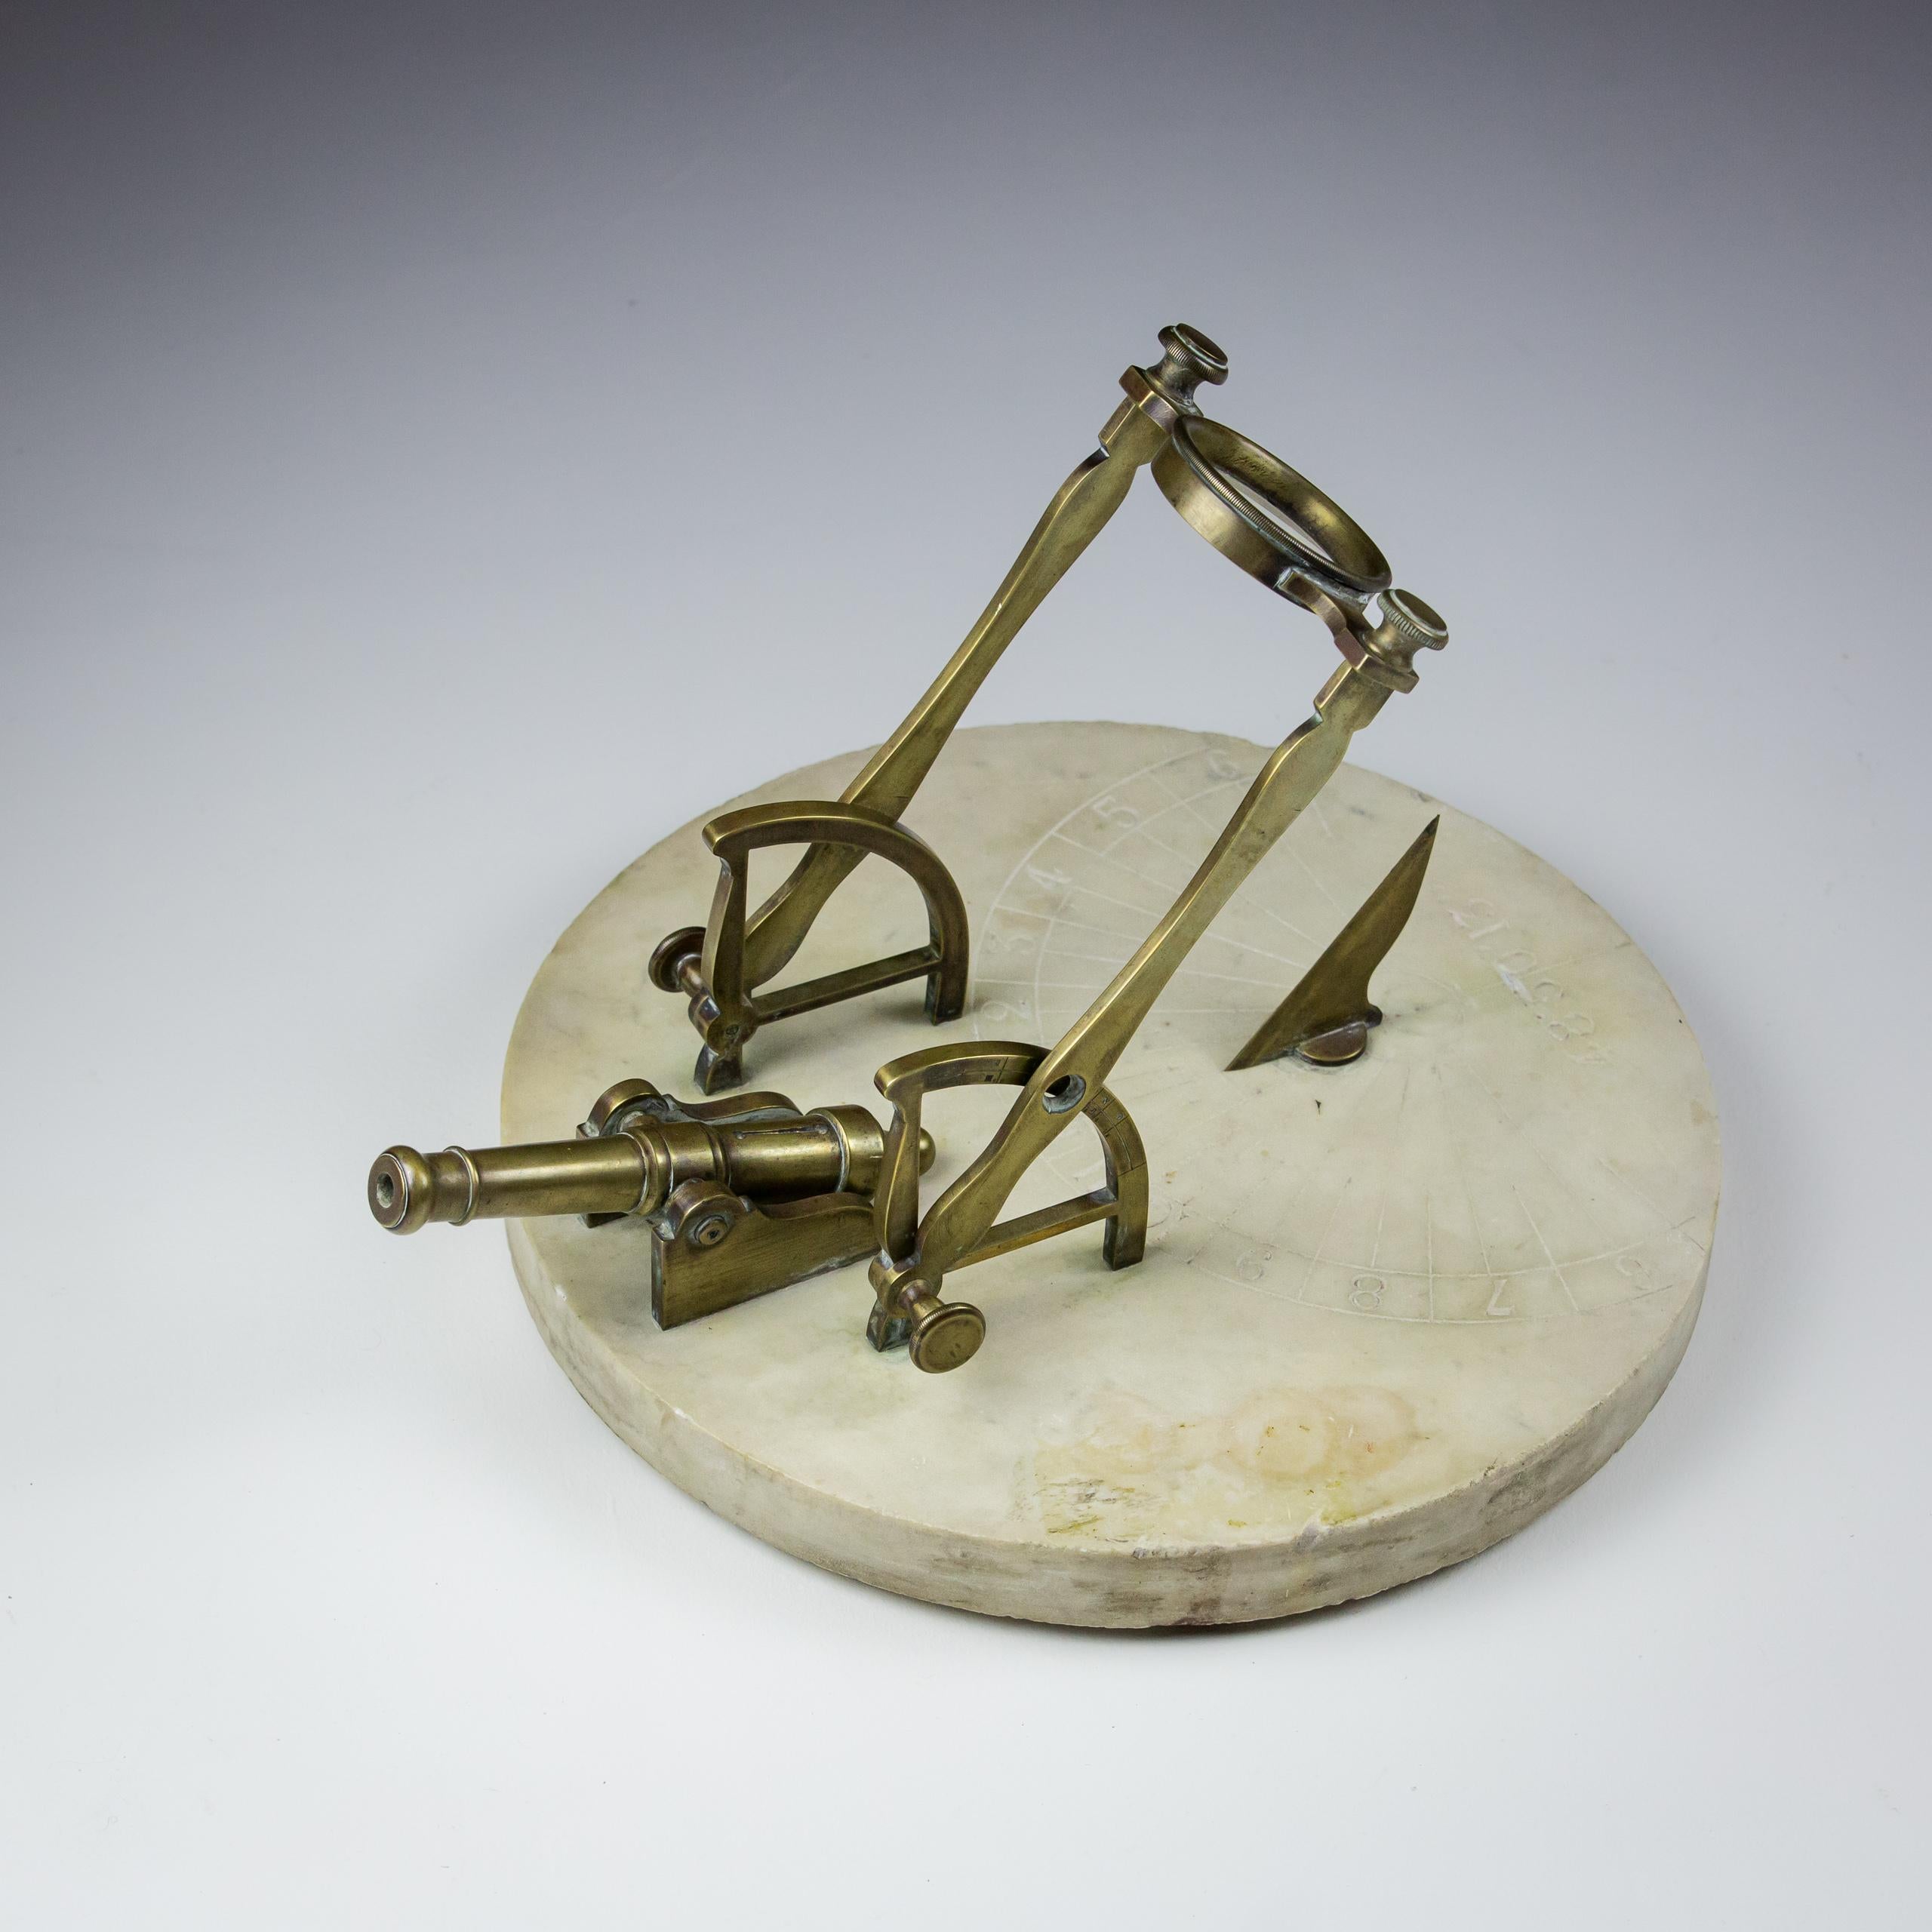 
A Fine 19th Century Meridian or Noon Cannon, Large Marble Base into which is carved a sundial with a bronze Gnomen, also engraved is the operational latitude 48 50 13'. Mounted cannon with overhanging adjustable lense. The idea being the cannon is